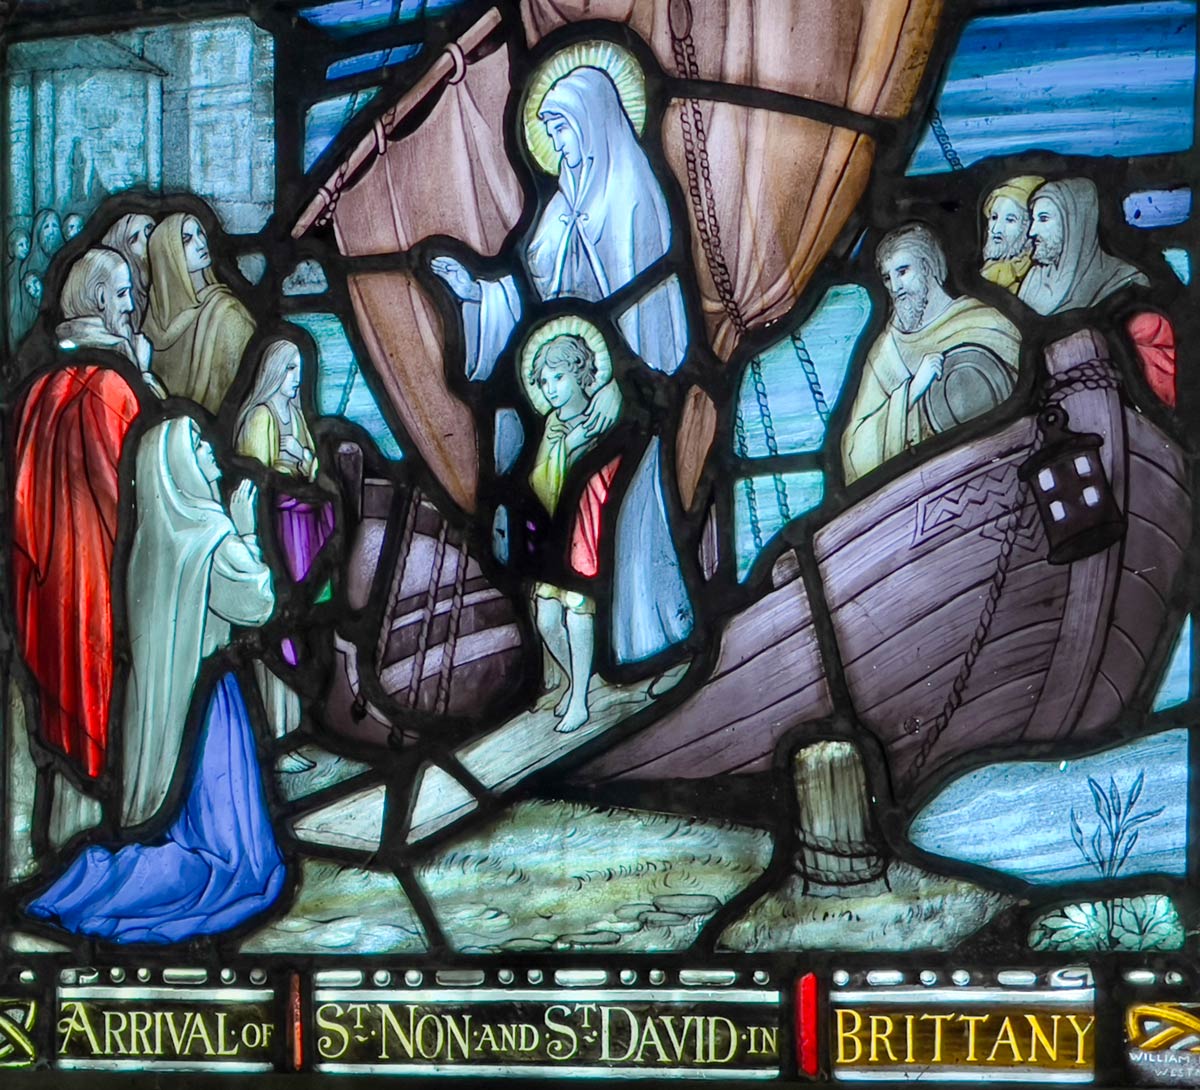 Stained glass window showing arrival of St Non and St David in Brittany, St Non’s Chapel, St David’s